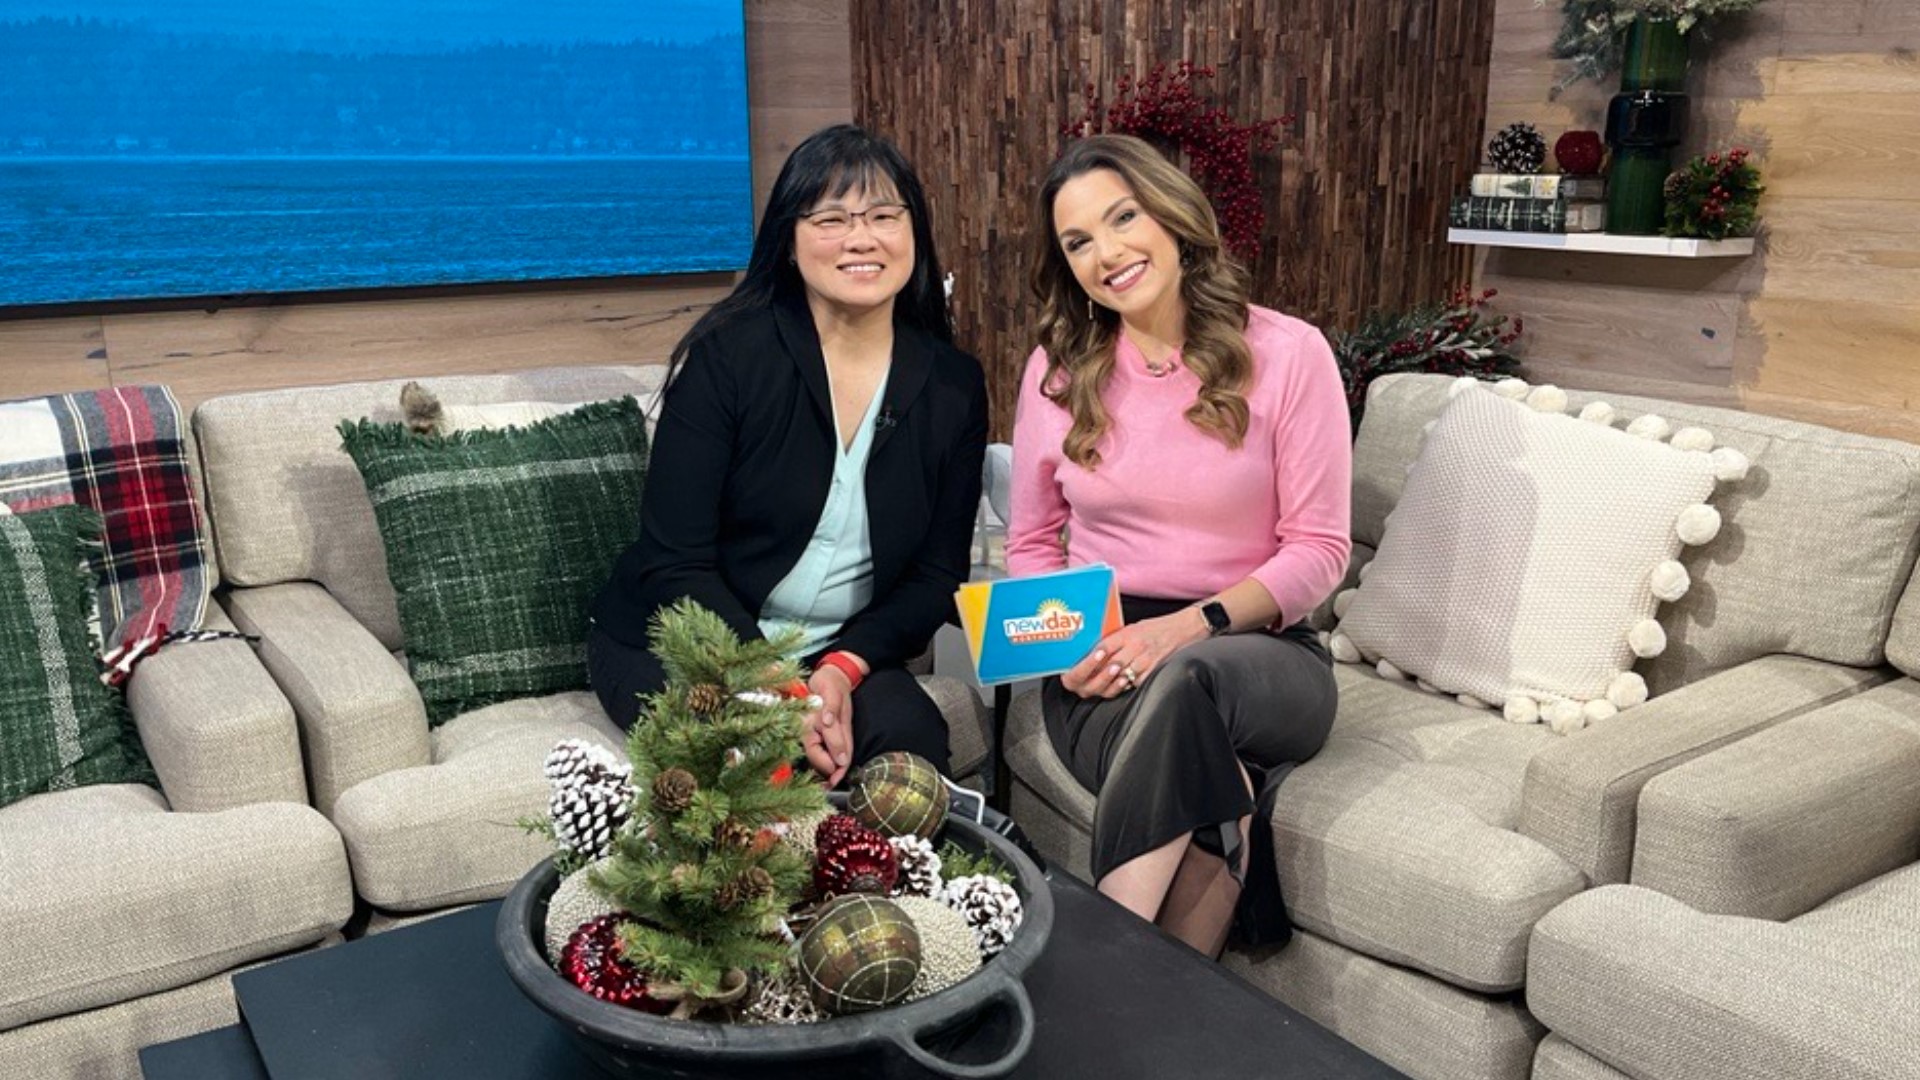 The holidays can be a challenging for many. Dr. Josephine Young talks about checking in on the mental health of young people. Sponsored by Premera Blue Cross.